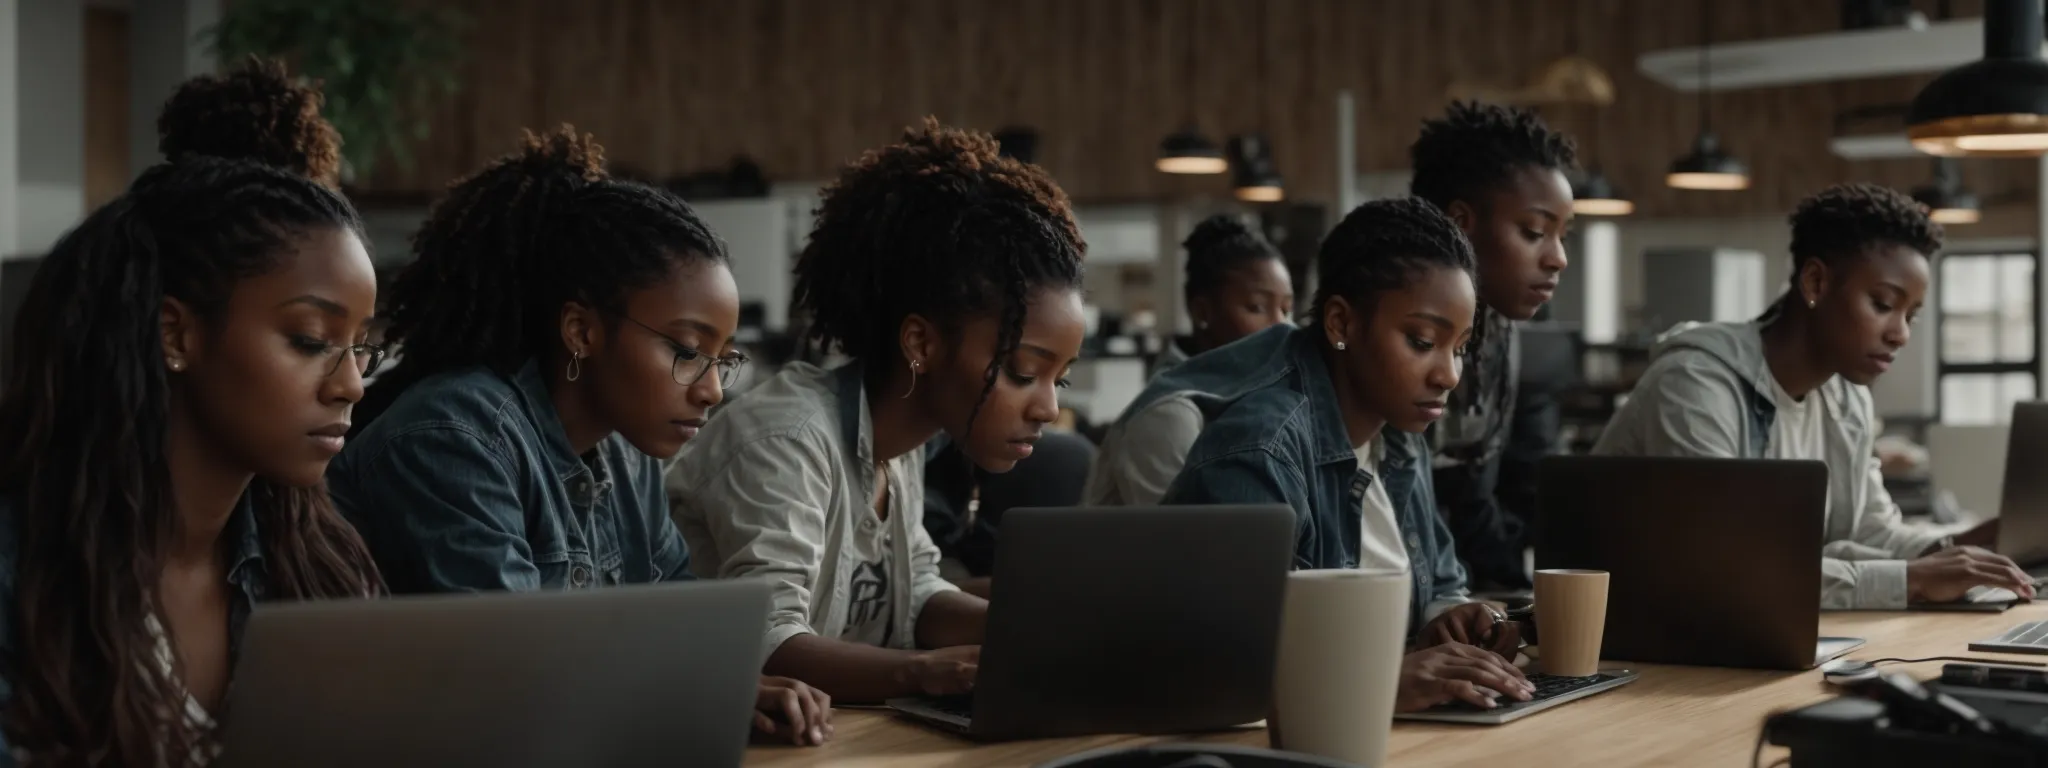 a group of diverse individuals collaboratively working on their laptops in a modern community workspace lit by soft, natural light.